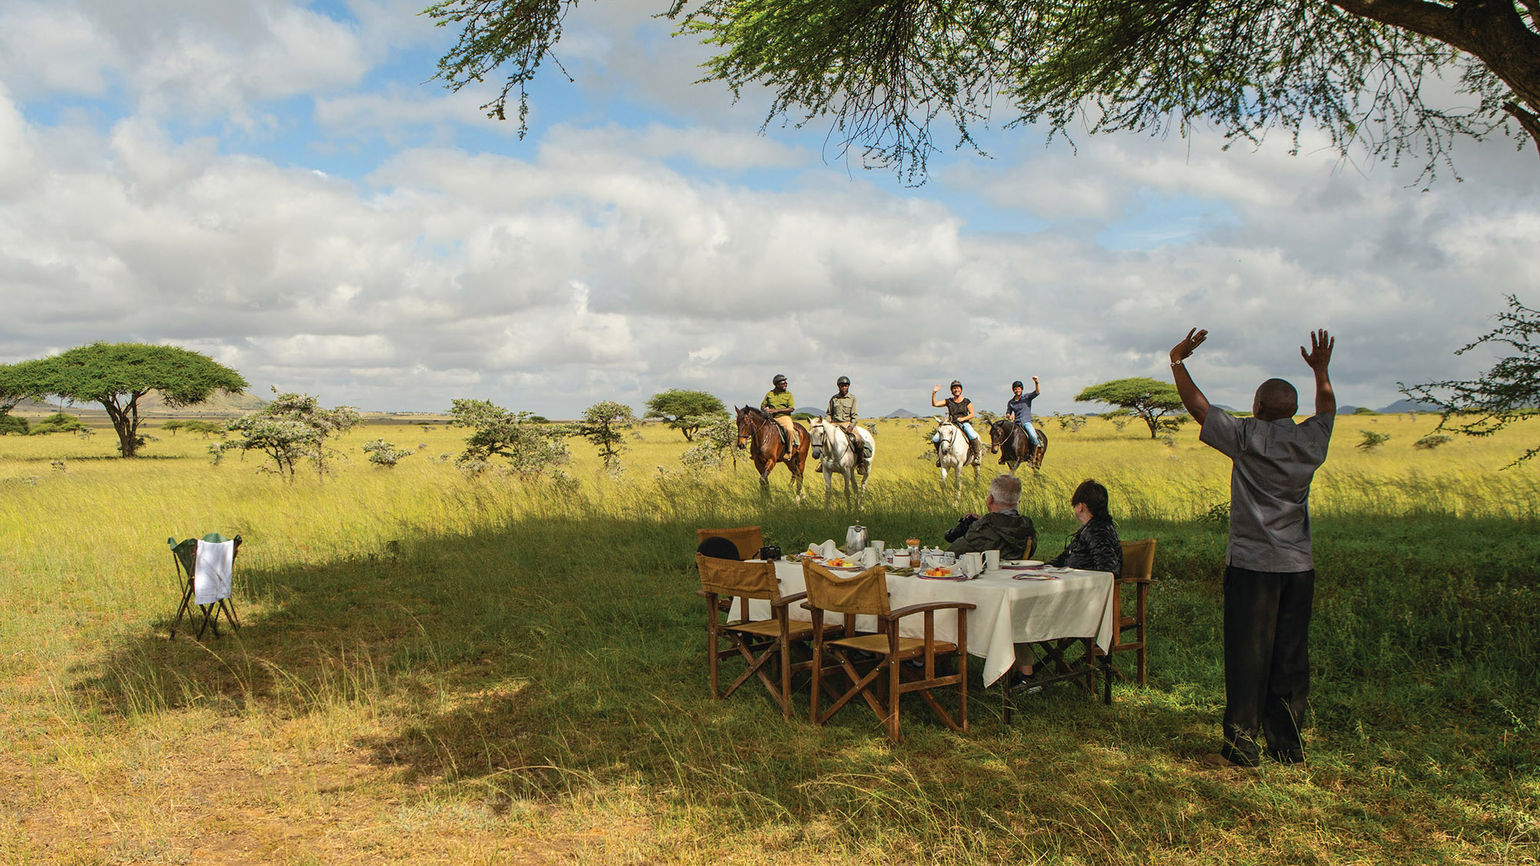 Great Plains adds a bit of romance to its safaris